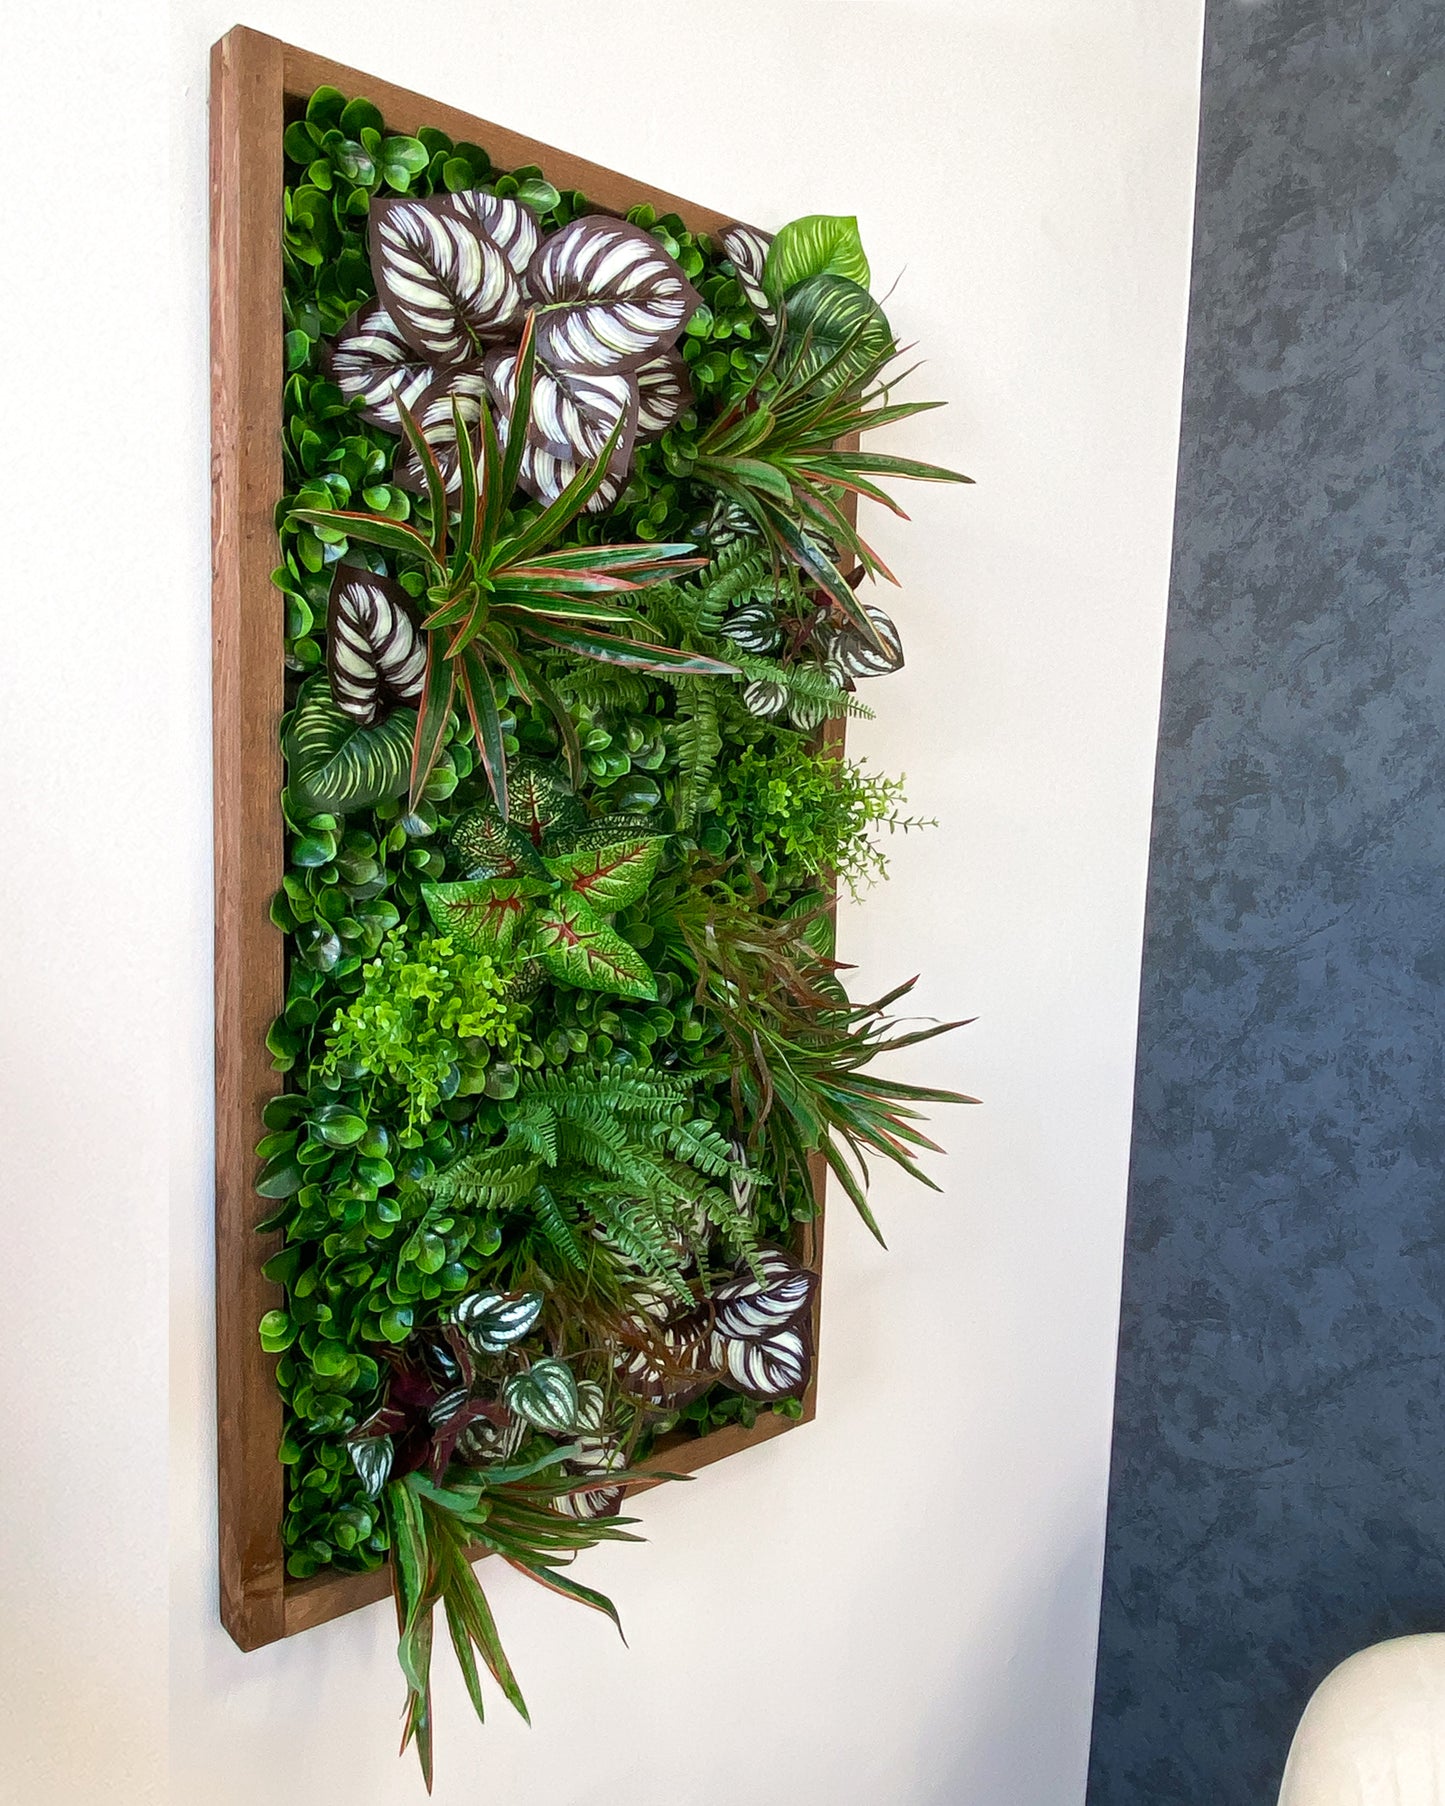 Plantframe/plant wall/moss wall "SORNA" made of Realtouch artificial plants with brown spruce wood frame